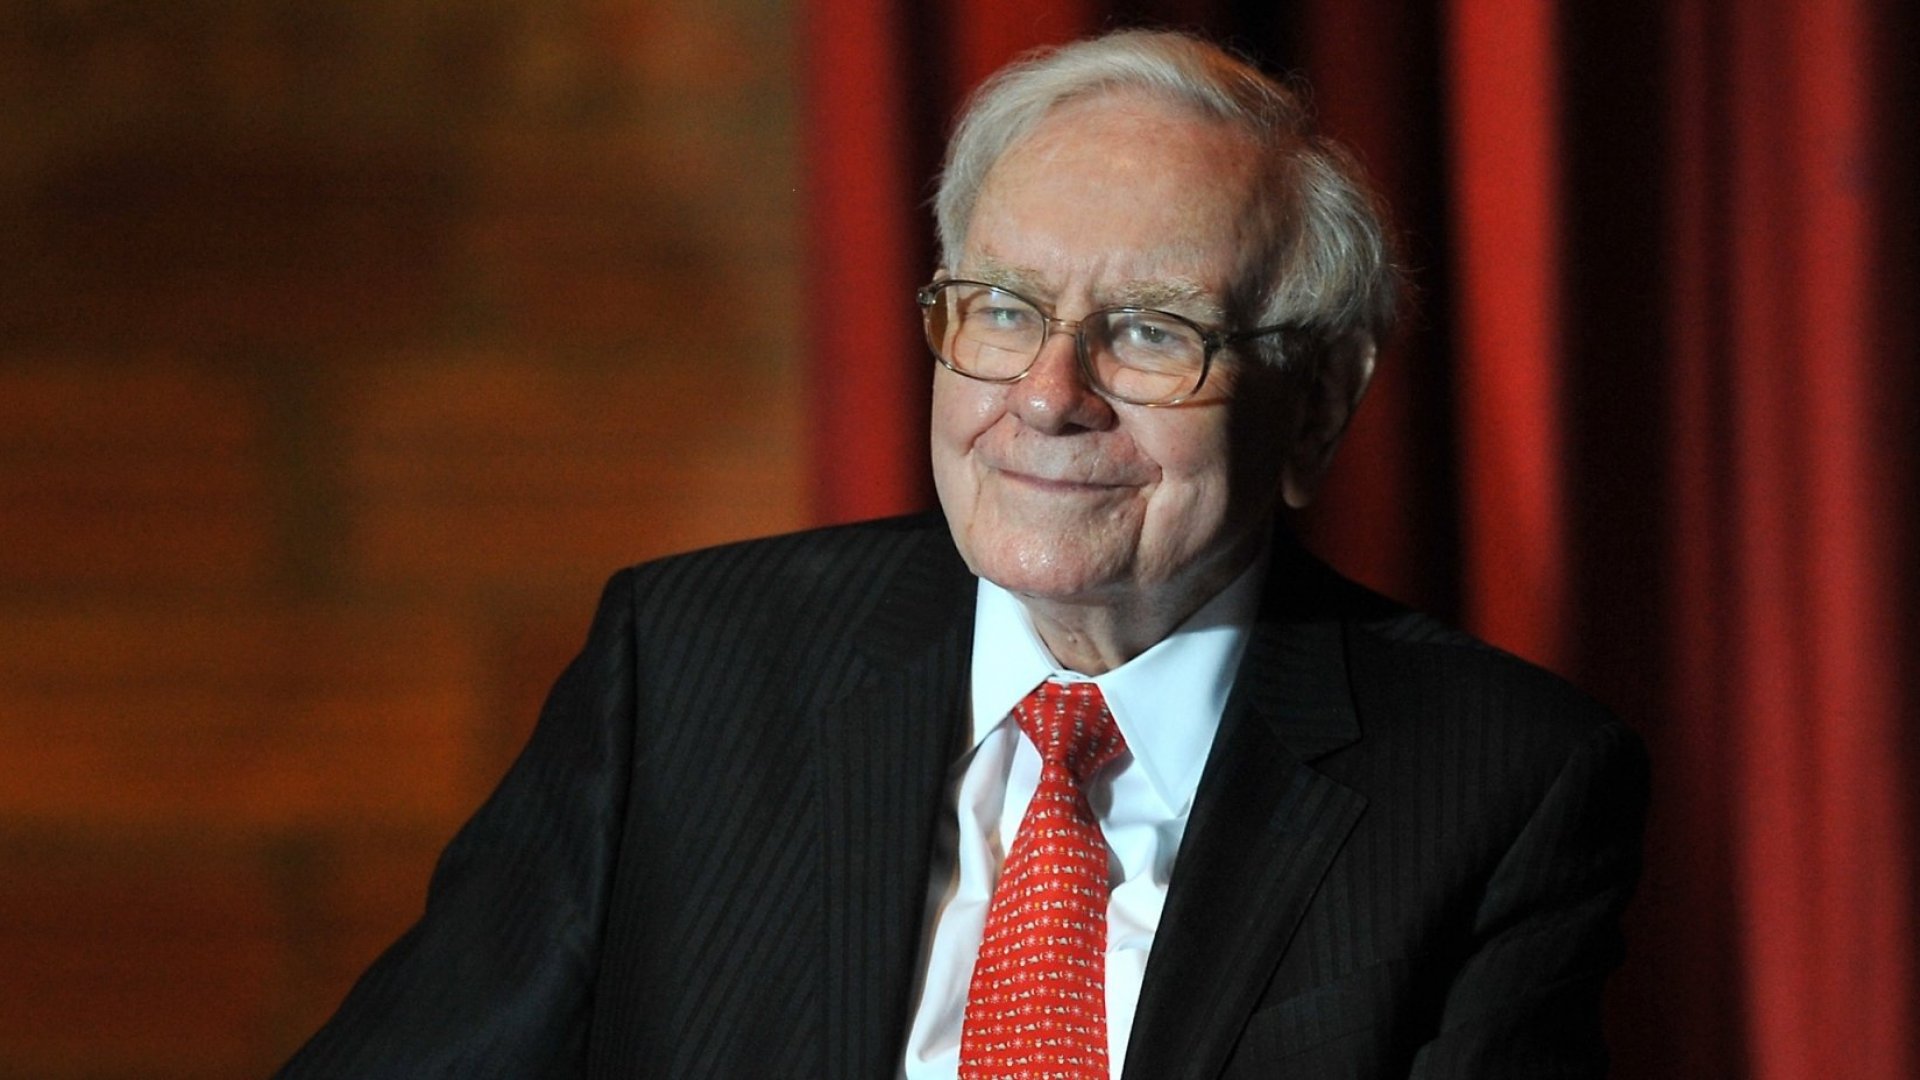 How Warren Buffett Beats Inflation: Simple Tips to Grow Your Skills and Wealth